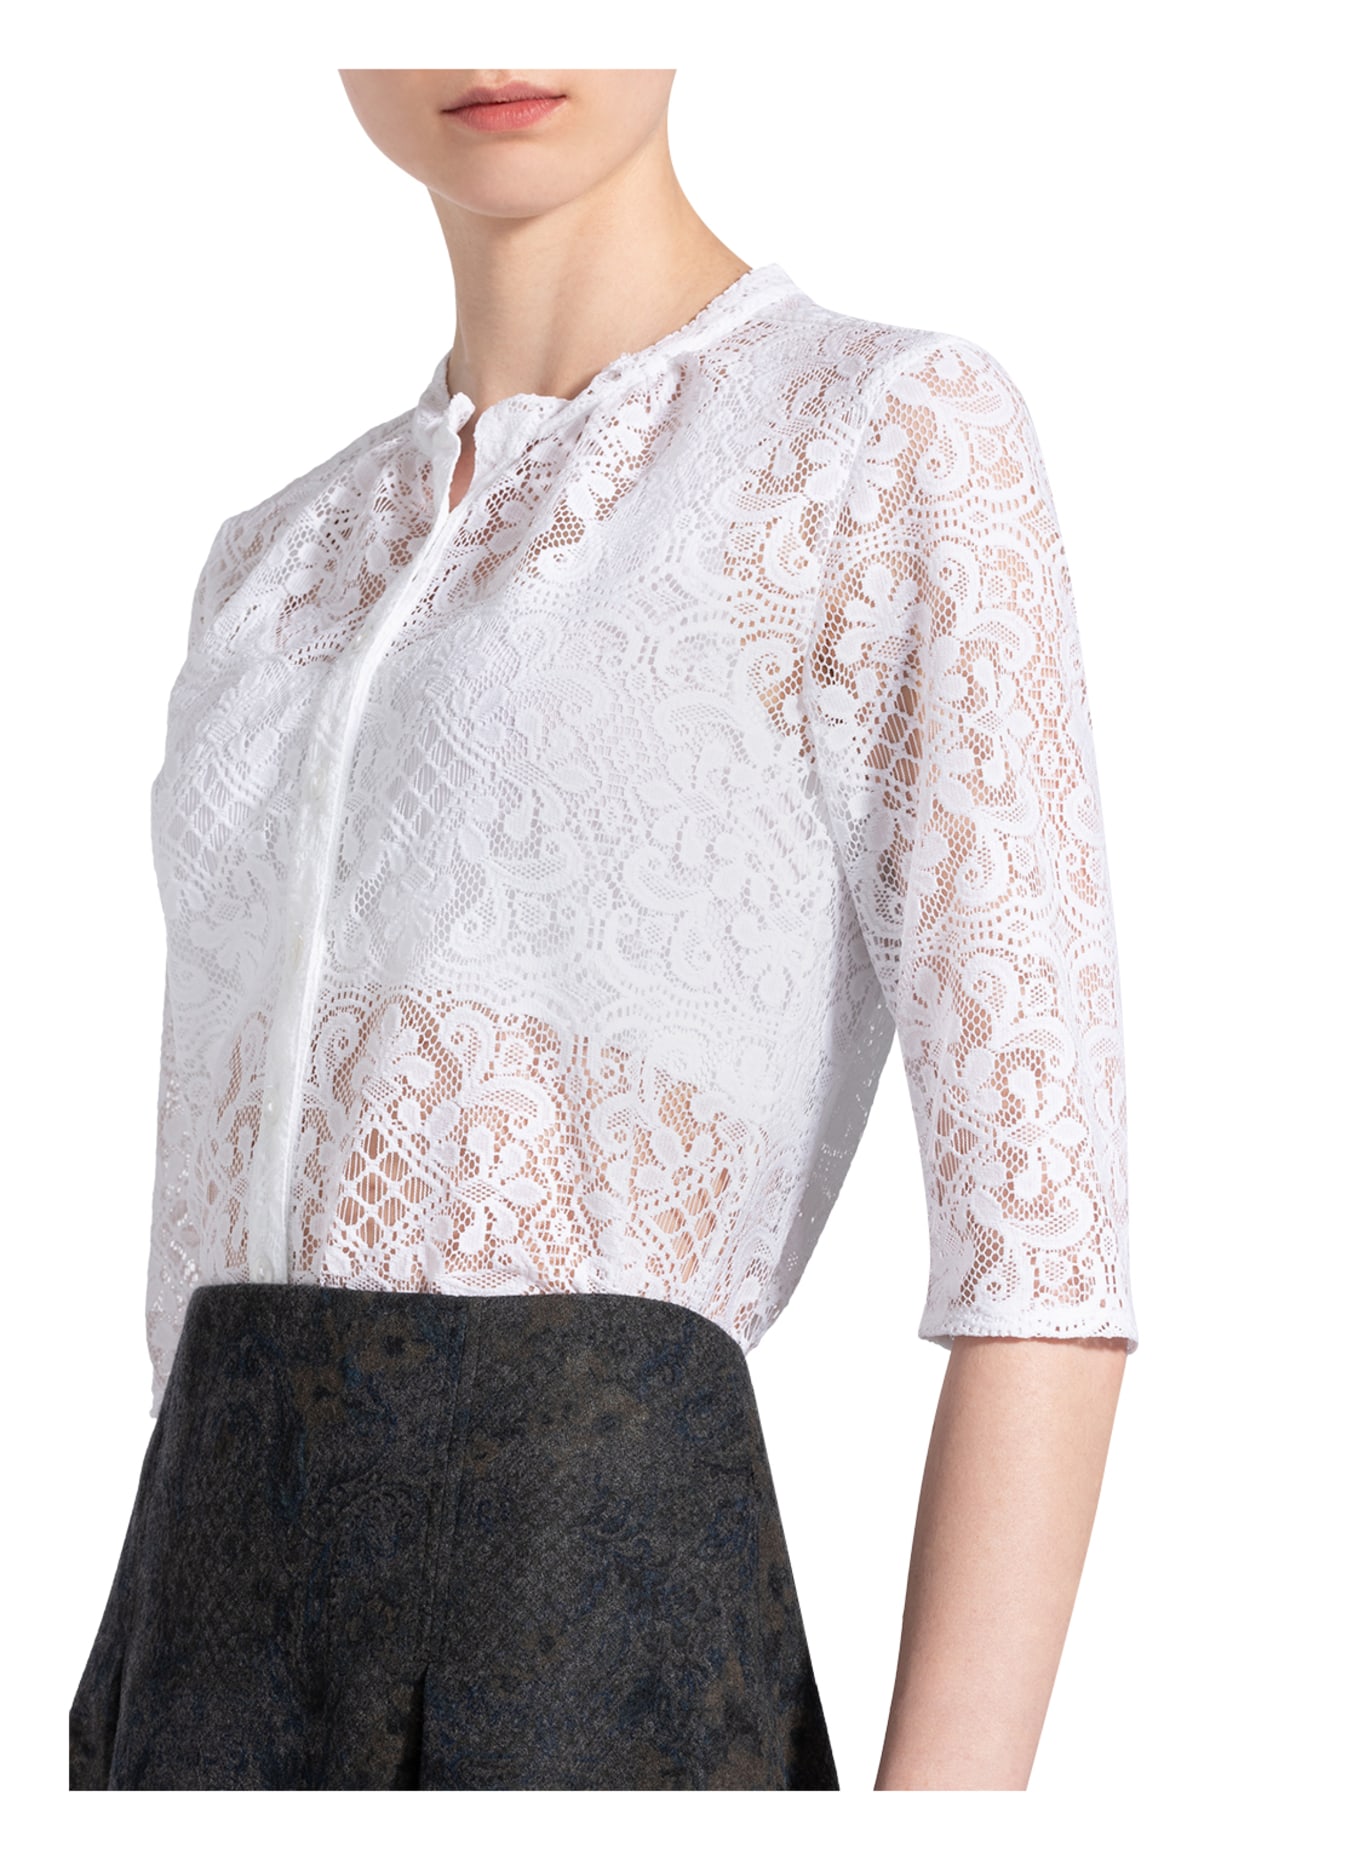 BERWIN & WOLFF Trachten blouse with 3/4 sleeves in lace, Color: WHITE (Image 3)